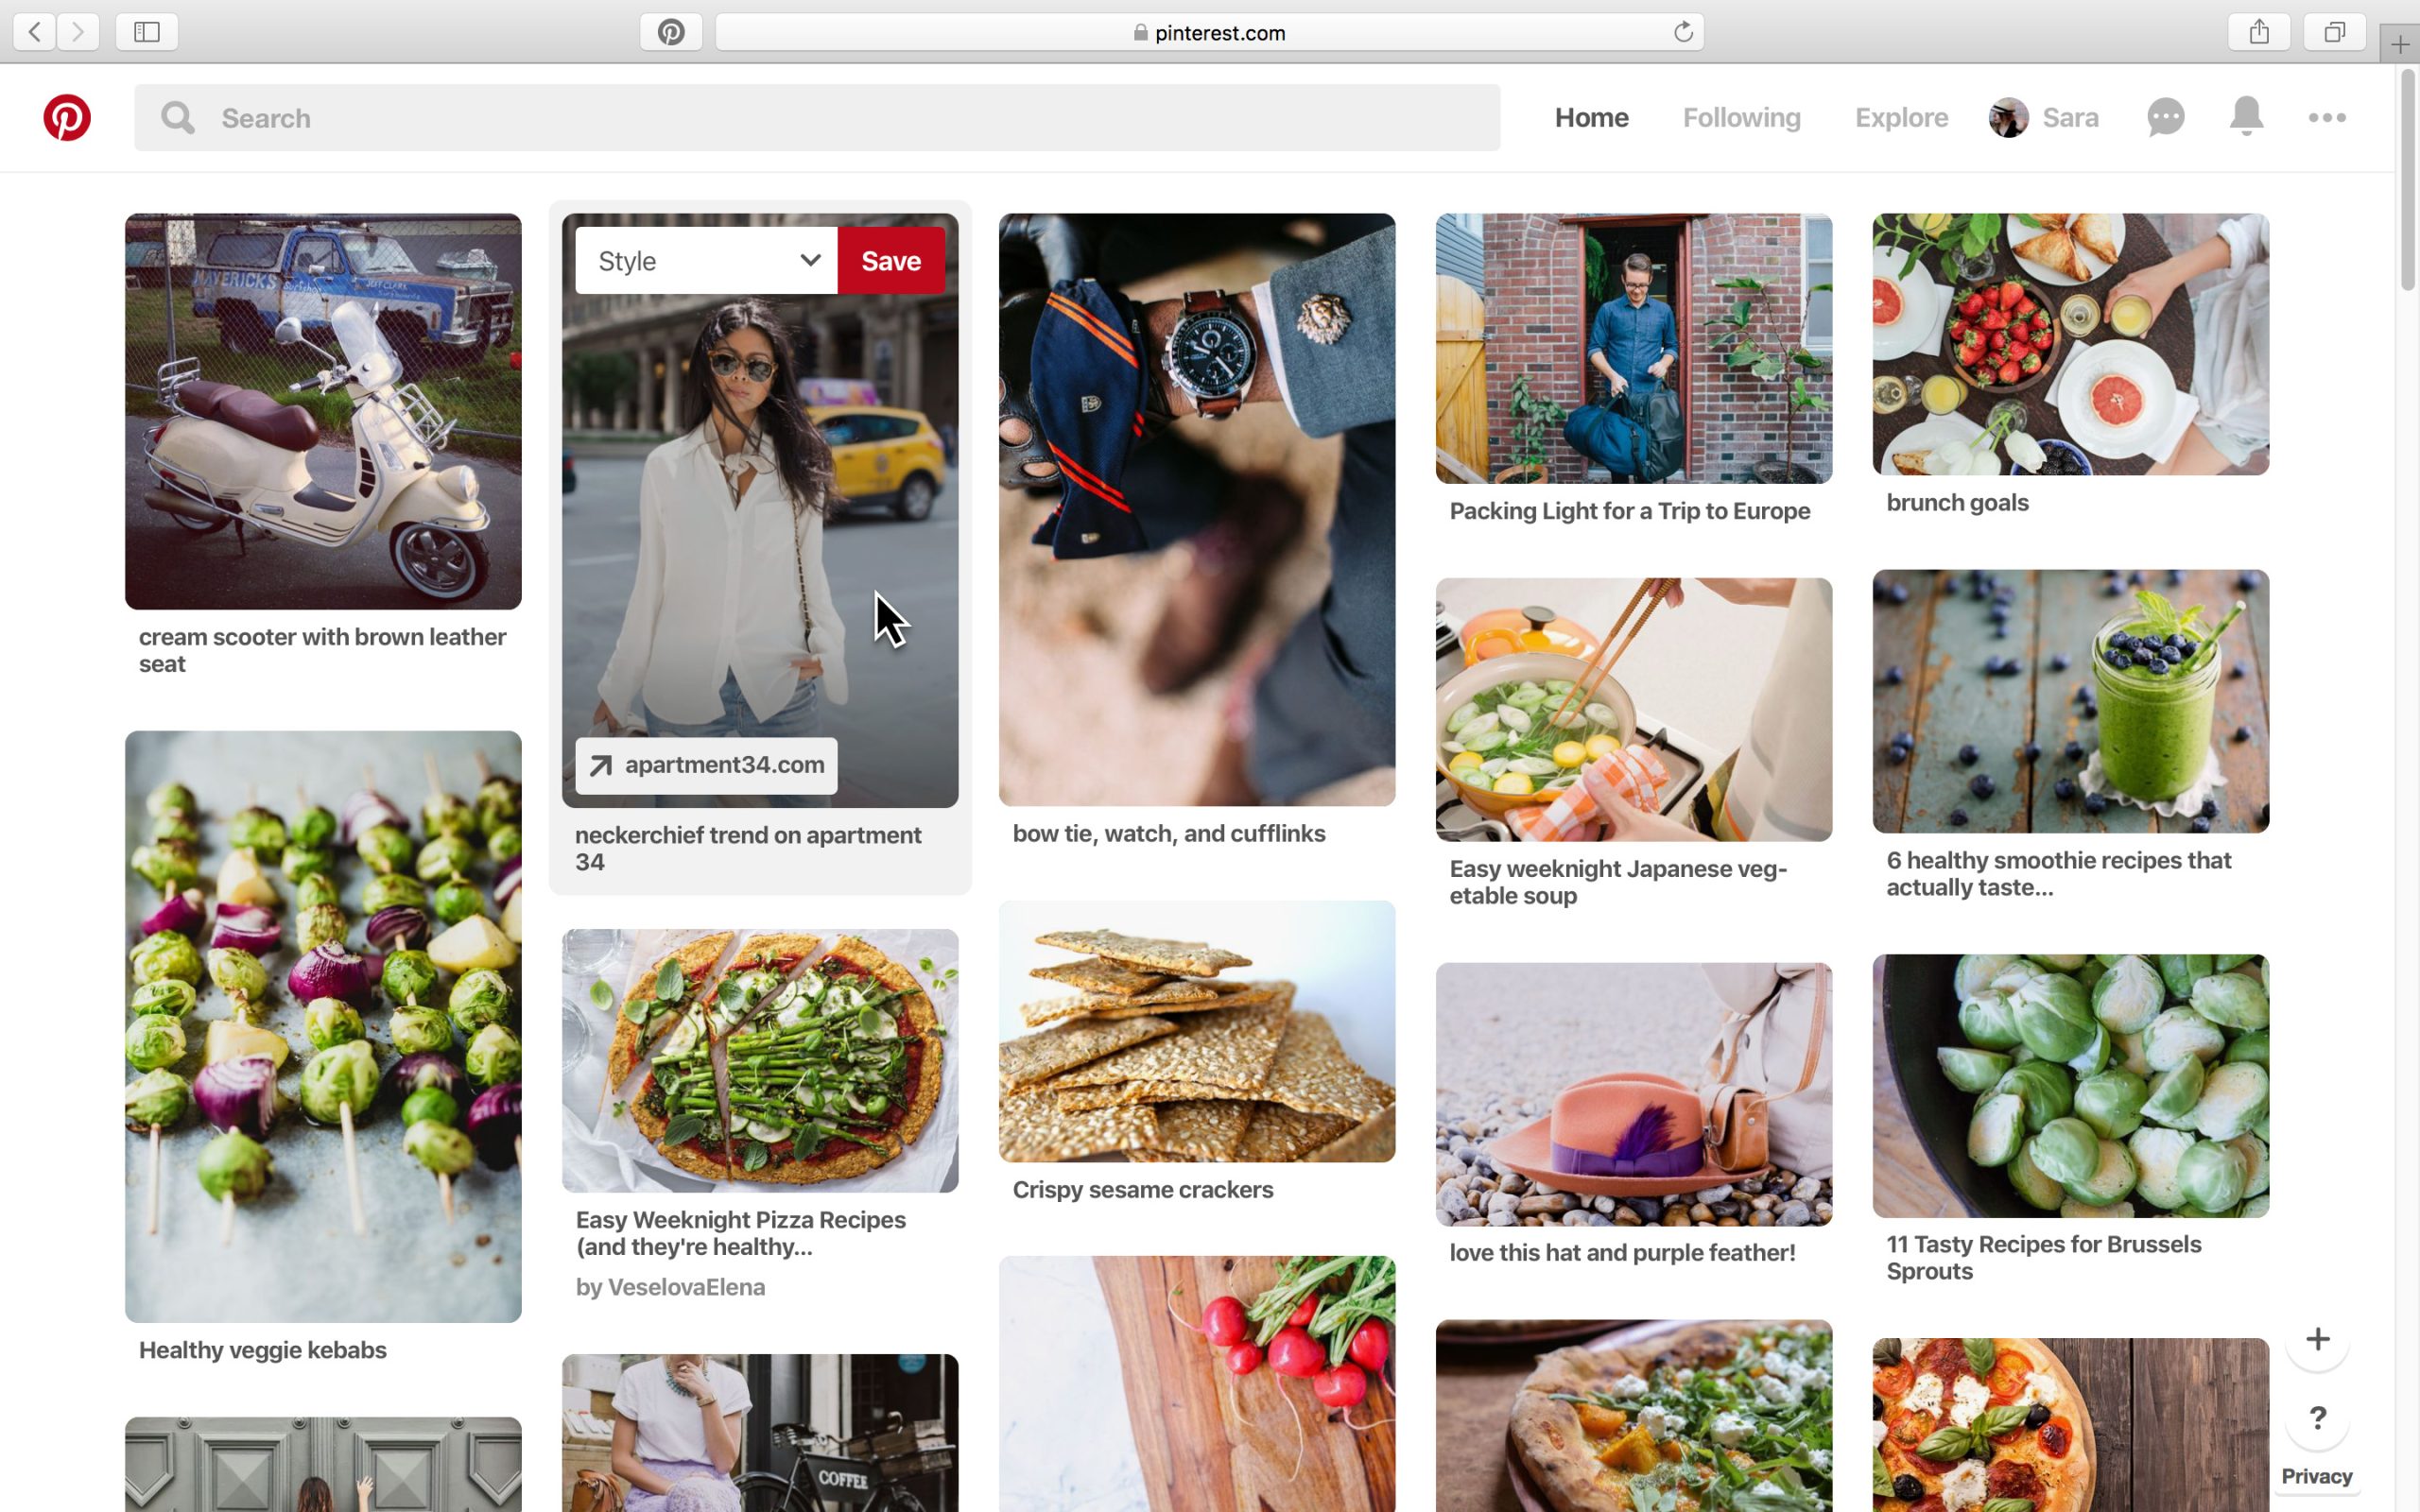 Tuning Pinterest home-feed. in latest 2019 update.